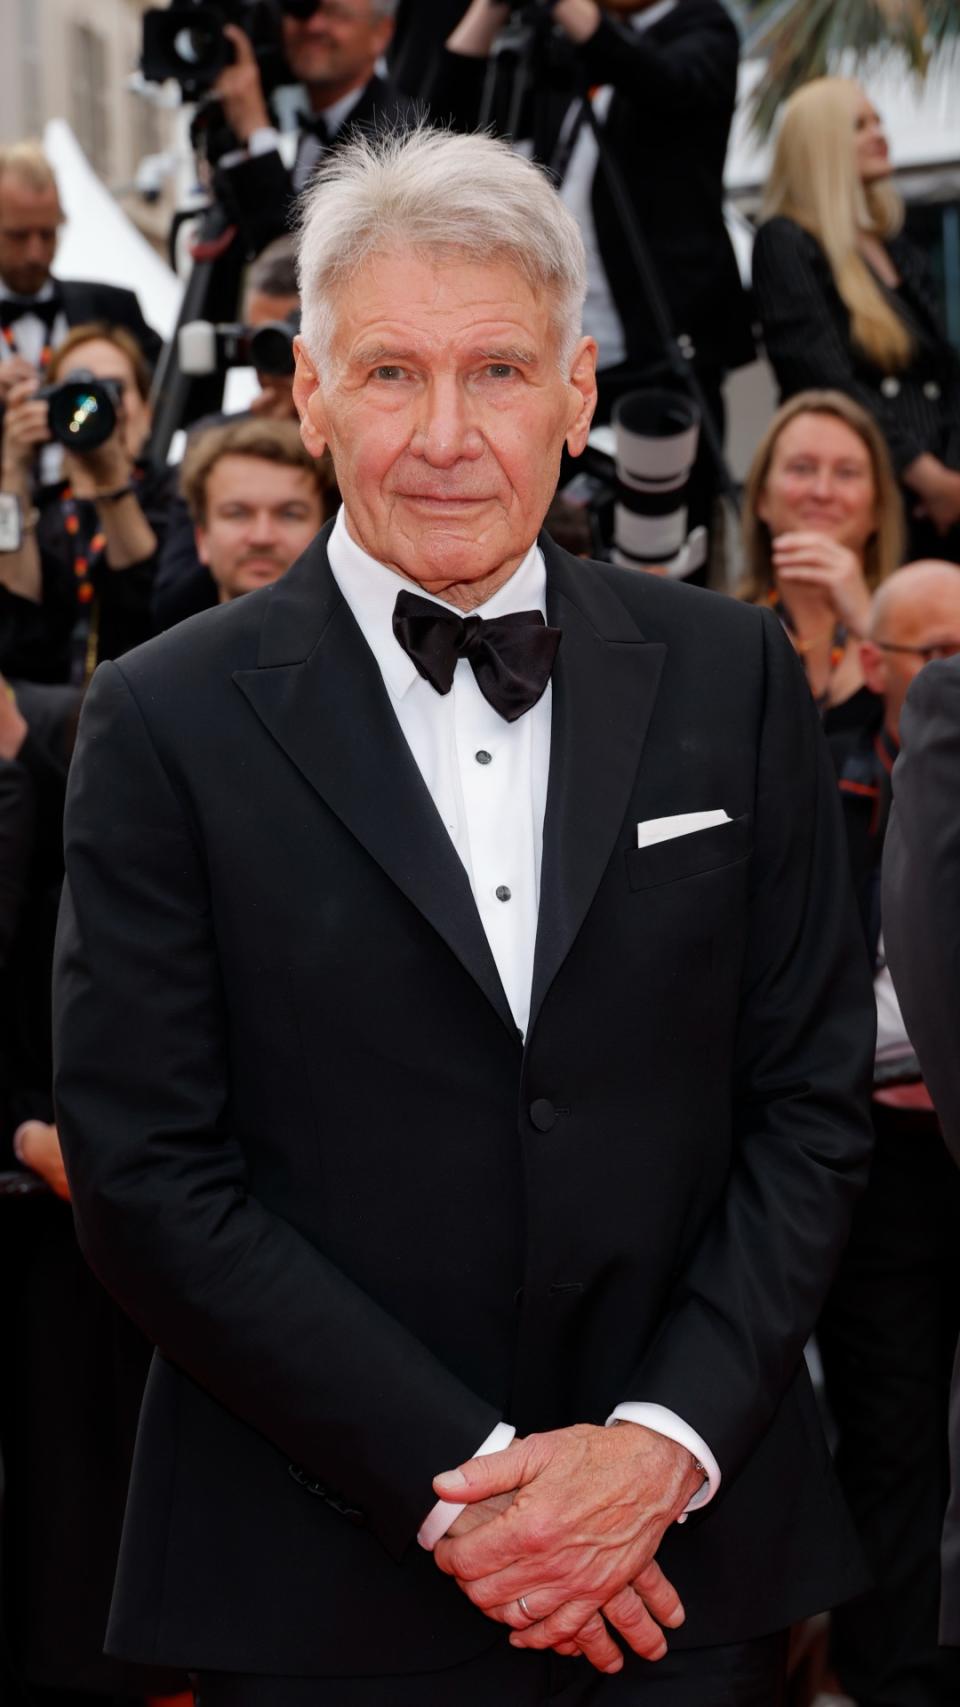 <p> In his career spanning seven decades, many might be surprised to learn Harrison Ford has only been nominated for one Oscar.  </p> <p> Despite having played some of the most iconic cinematic characters of all time, including Star Wars' Han Solo, Indiana Jones, and the protagonist of the Blade Runner films, Harrison's only Oscar nom came in 1986 for Witness.  </p> <p> That year, William Hurt took home the award for Kiss of the Spider Woman.  </p>